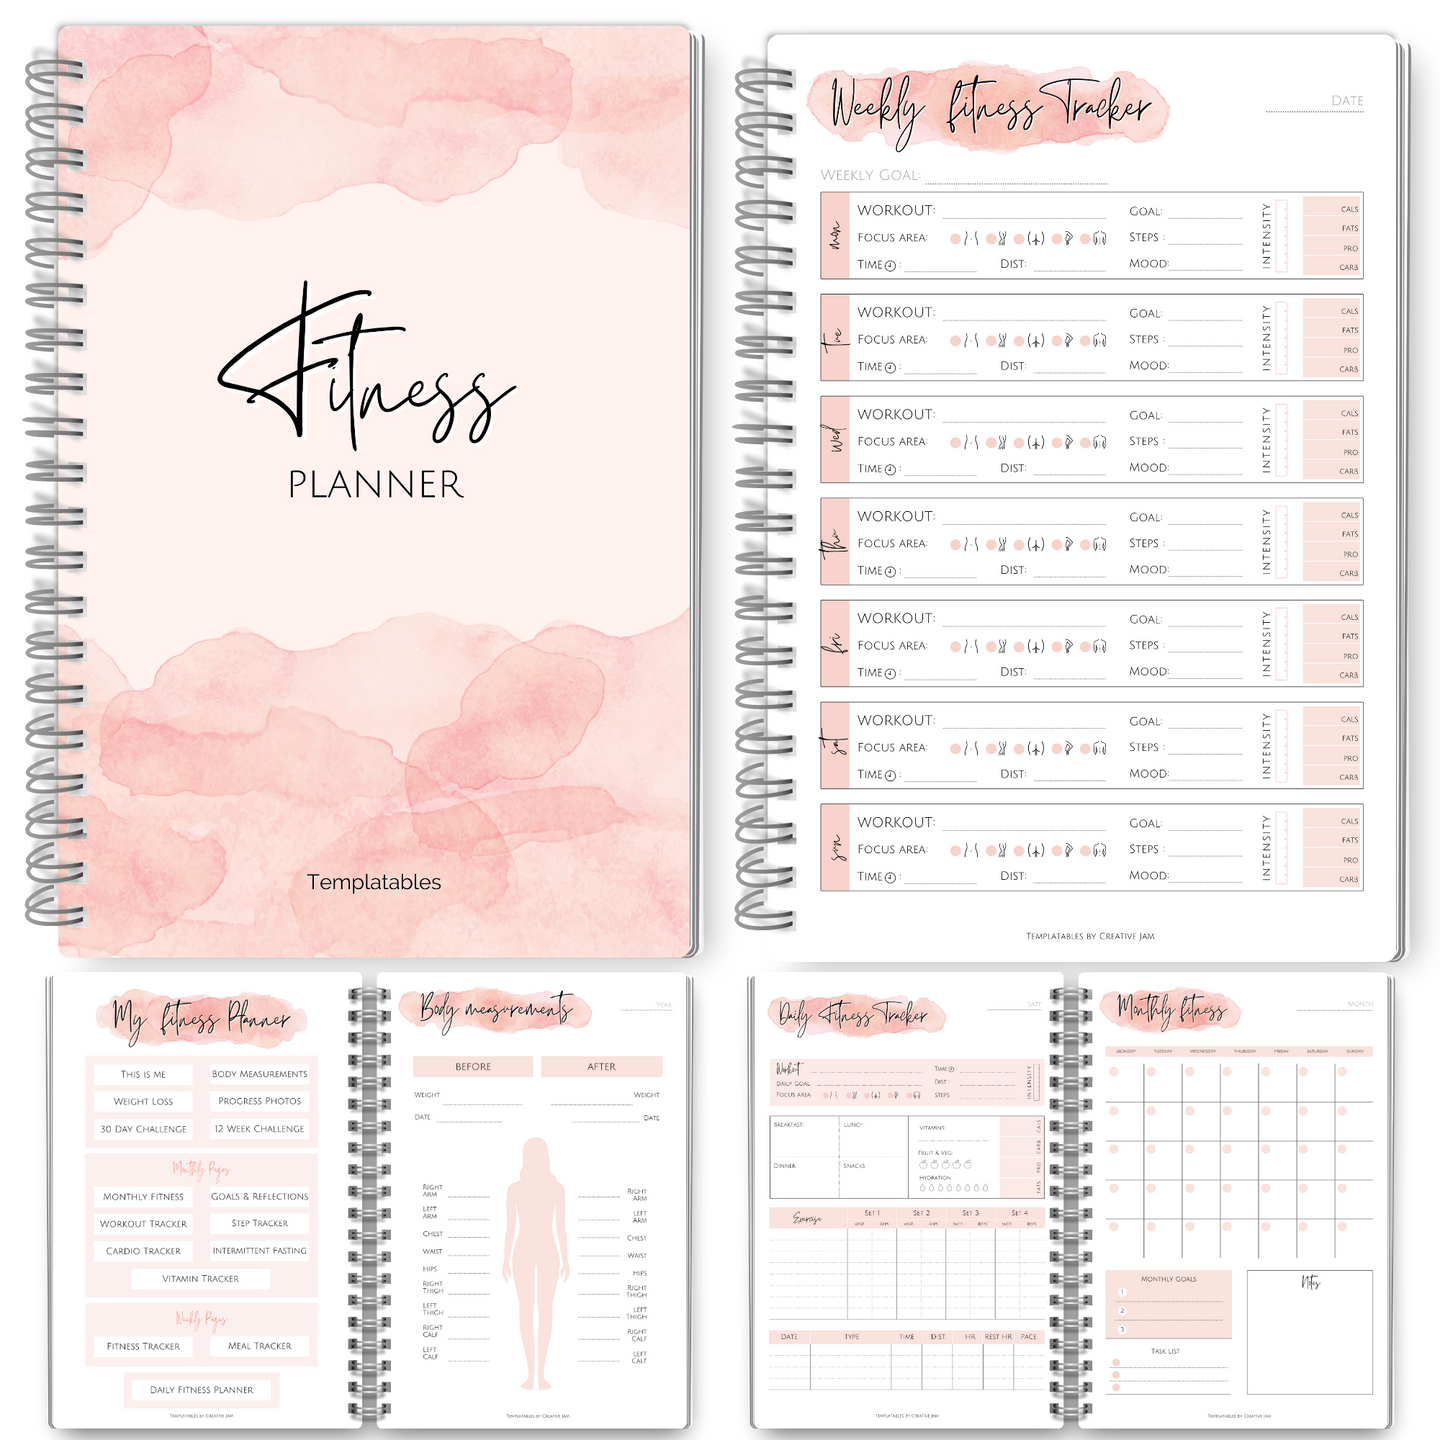 90 Day Fitness & Workout Planner for Women | Gym Journal, Weight Loss Tracker, Meal Planner, Self Care Habit Tracker | A5 Pink Watercolor